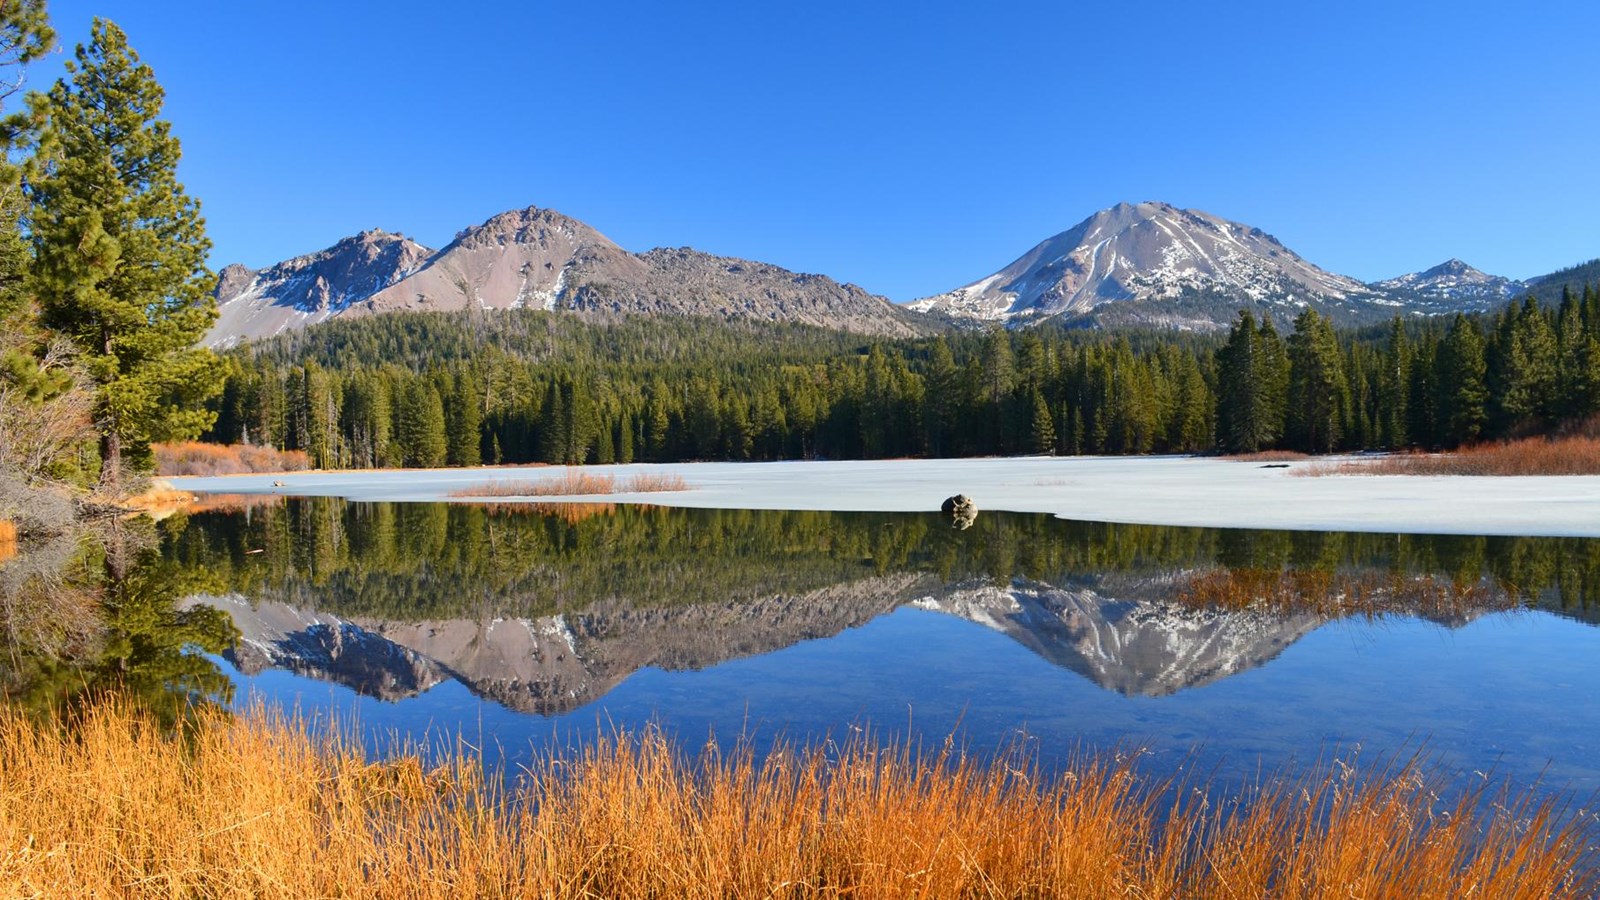 Two volcanic peaks reflected in a partially frozen lake lined by golden grass and evergreen trees. 